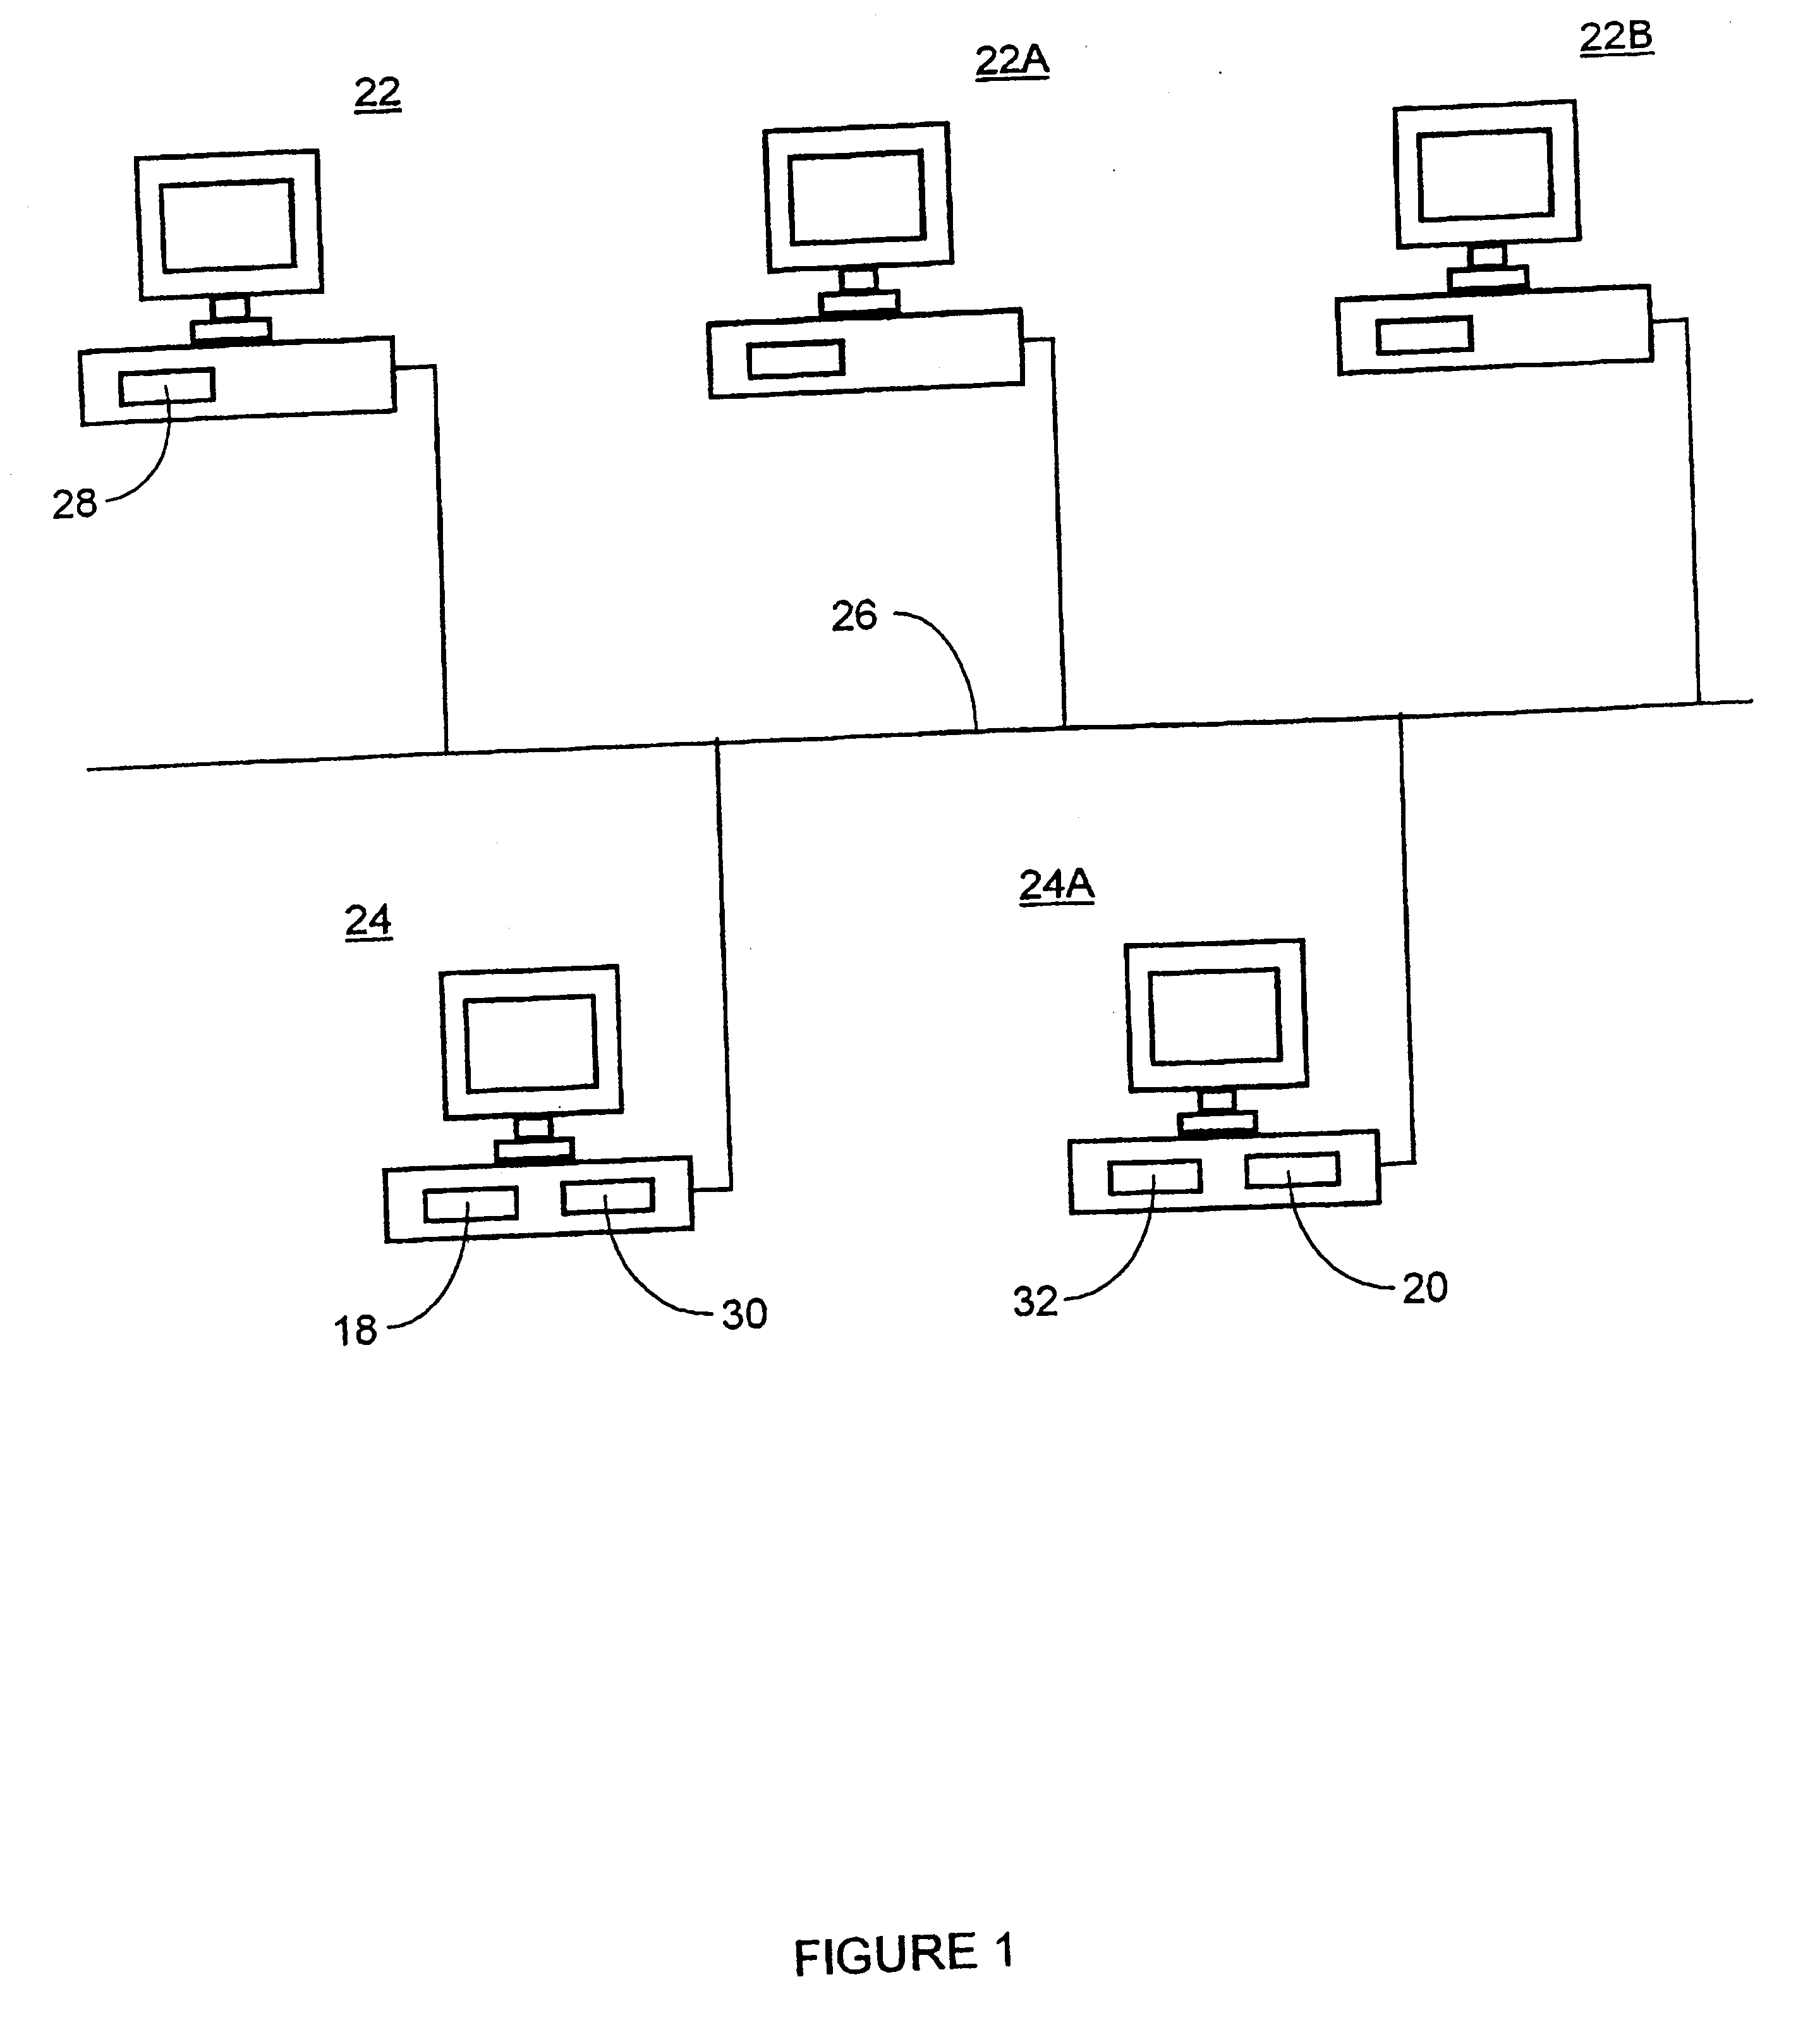 System and method for obtaining improved search results and for decreasing network loading